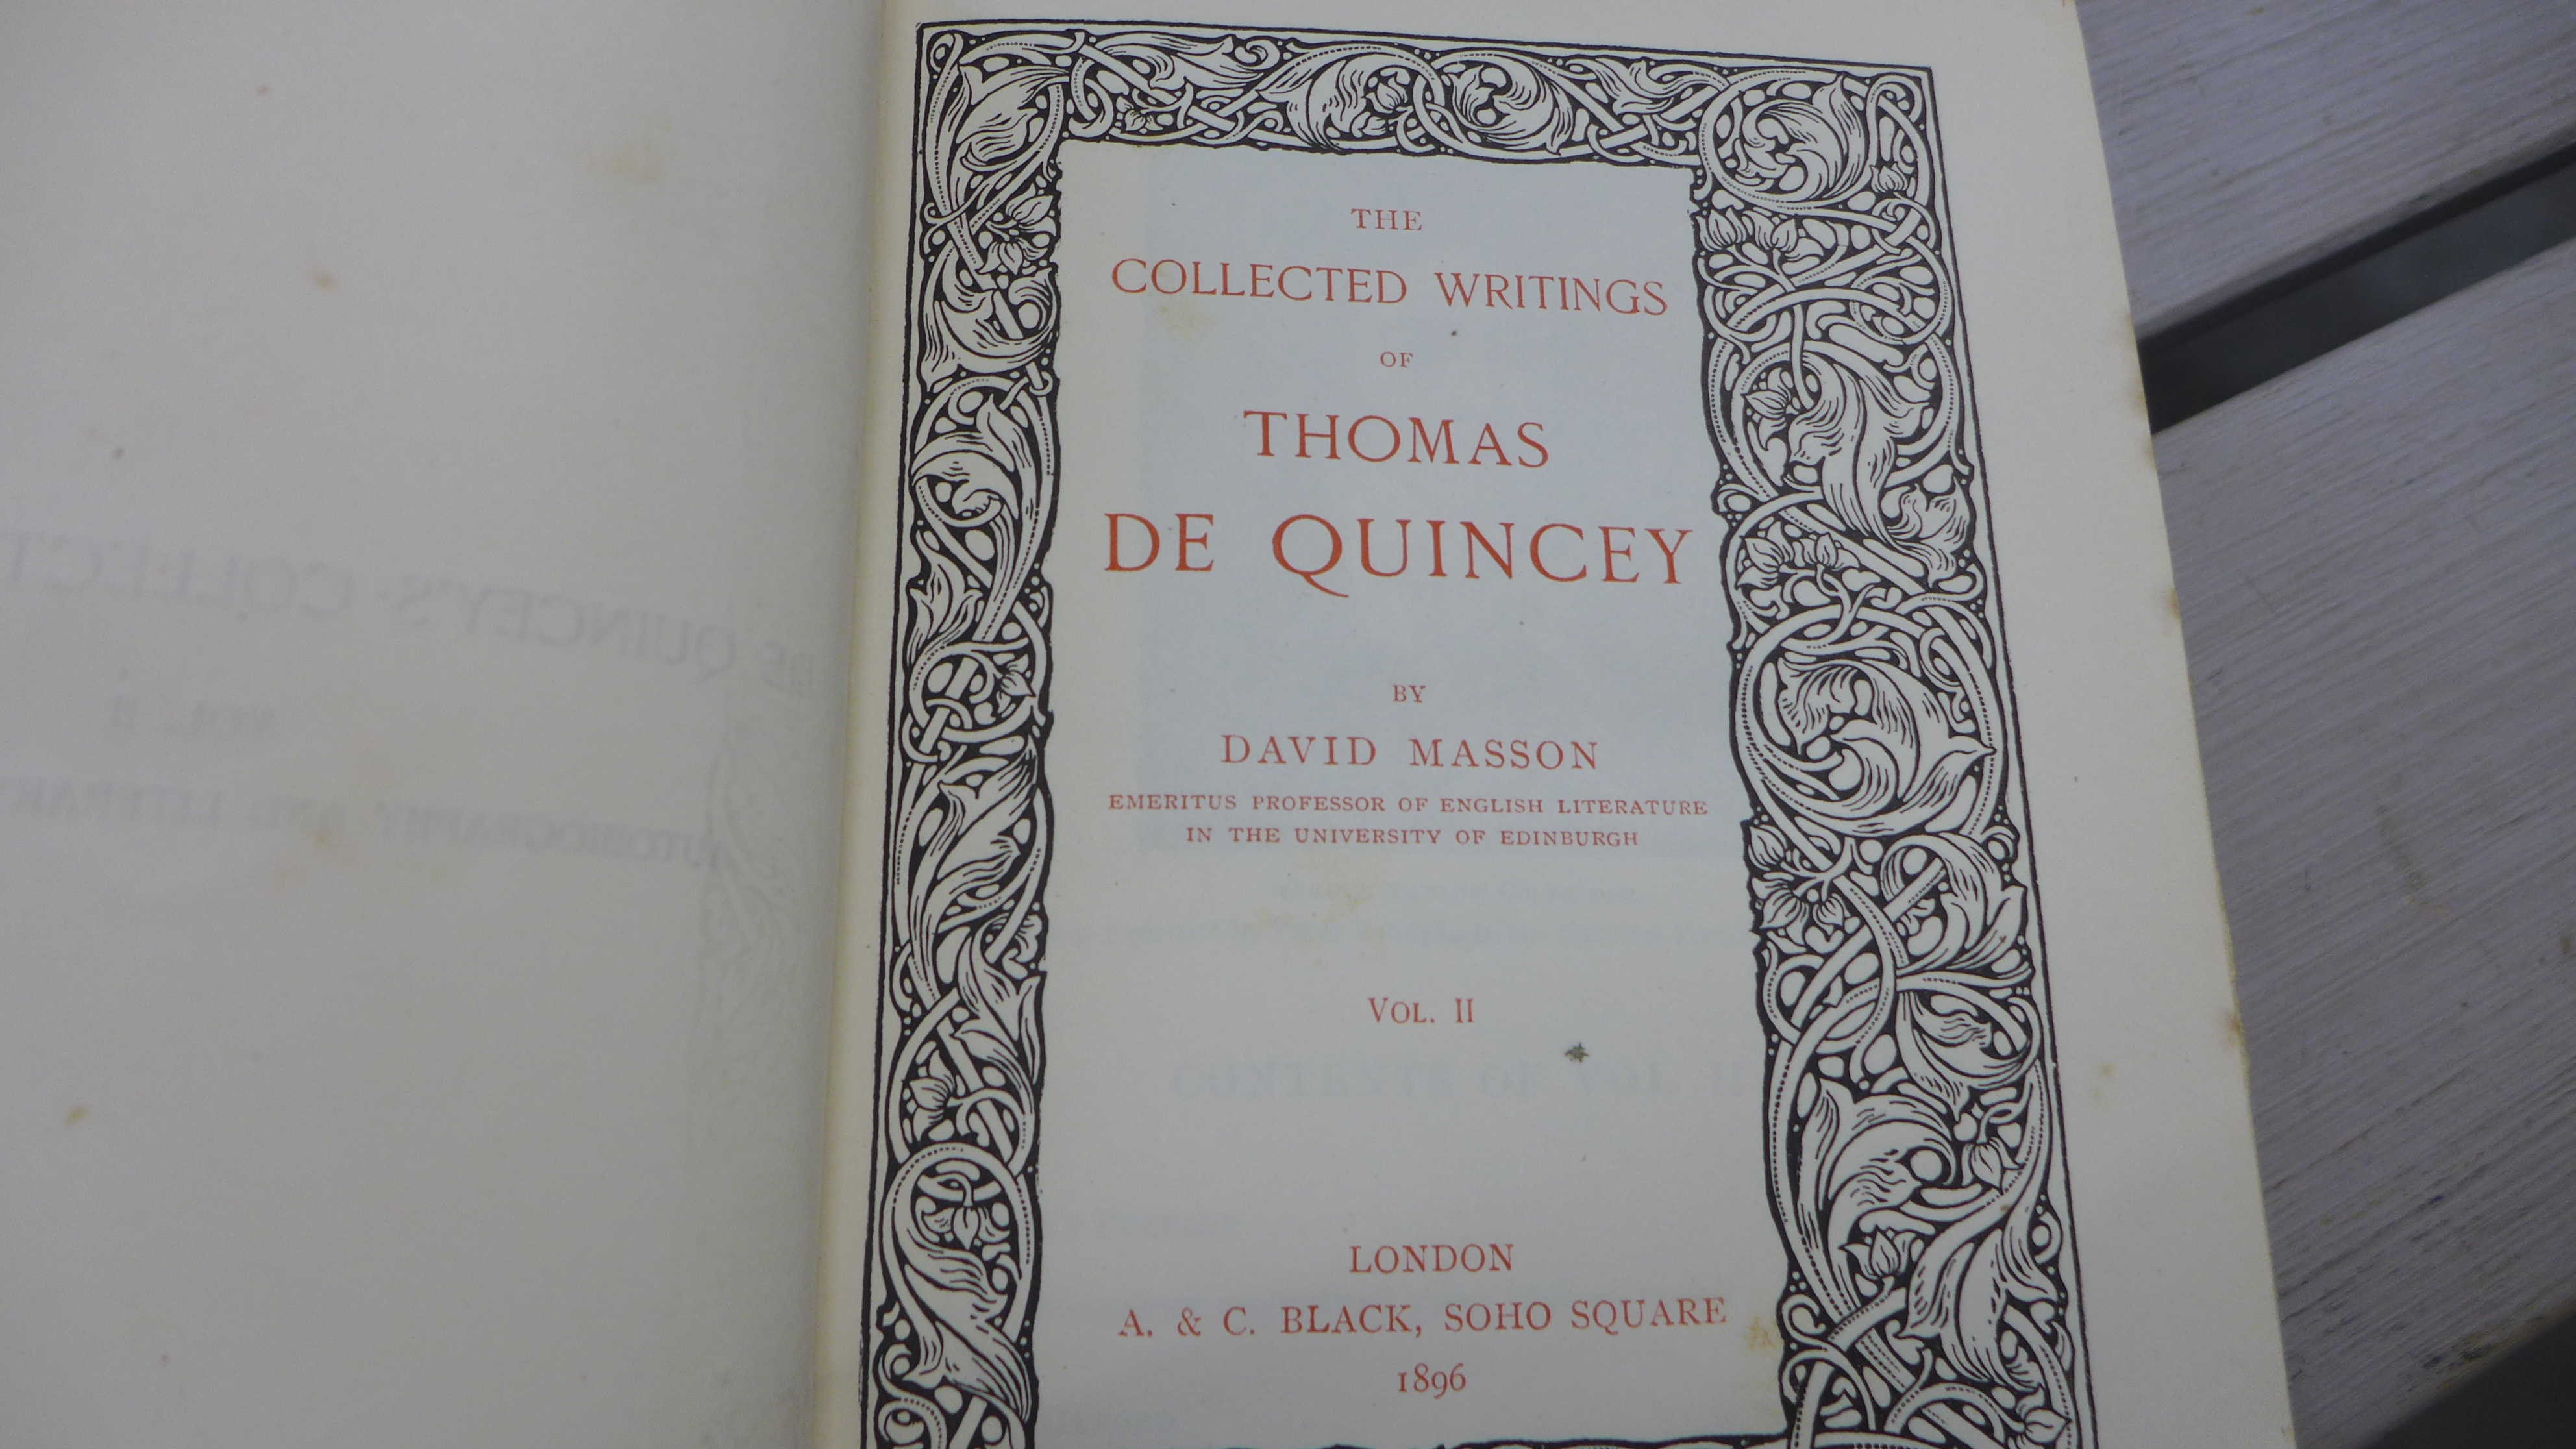 Thomas de Quincey 1897 - The collected writings of Thomas De Quincey by David Masson - 14 volumes - Image 2 of 2